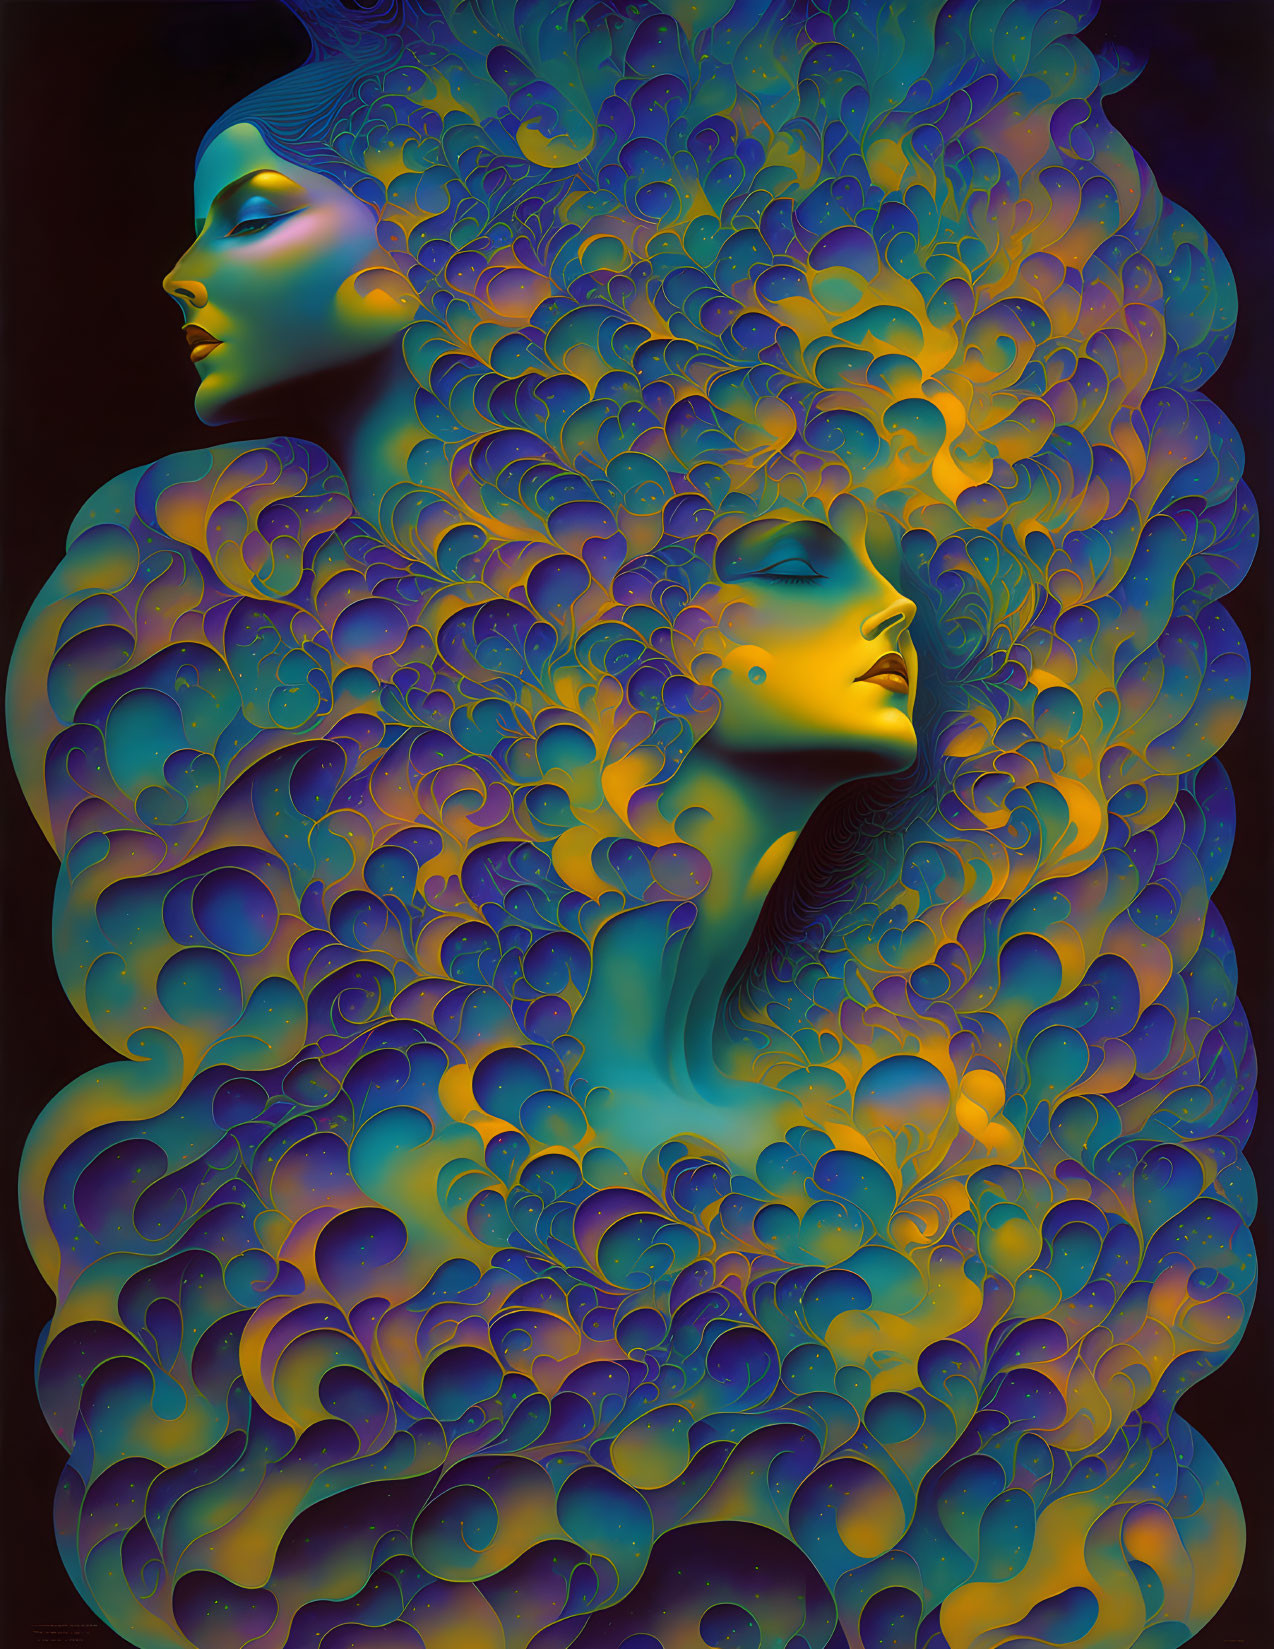 Stylized Faces with Flame-like Patterns in Blue, Purple, and Gold